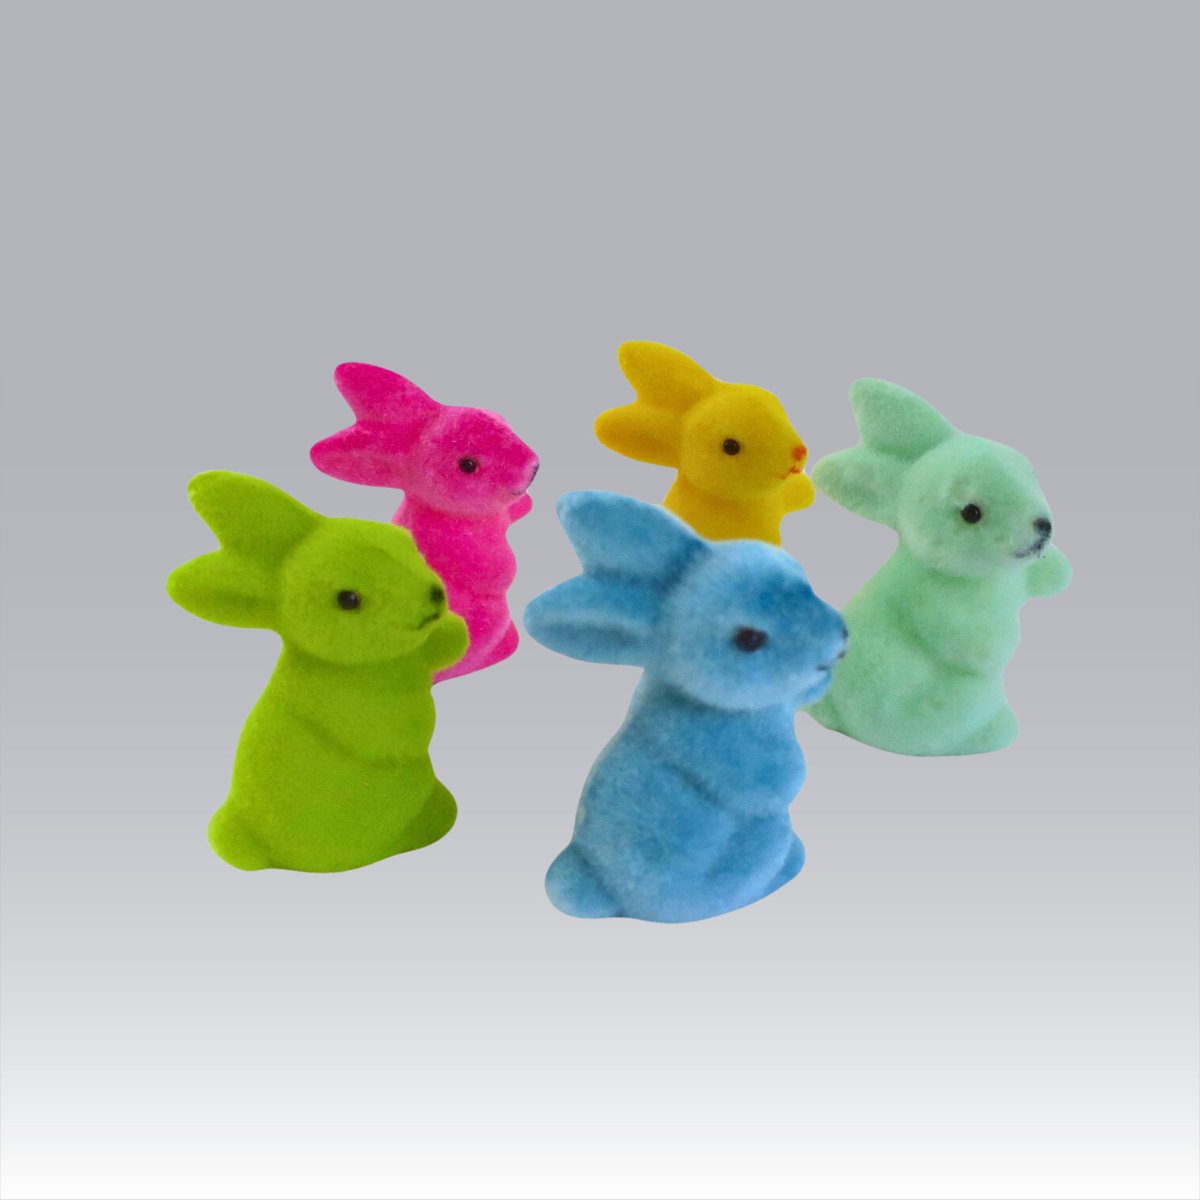 Mini 2' Flocked Bunnies for Spring Tablescapes, Centerpieces, Wreathes, or Tiered Trays, sold separately tuppu.net/434ef8d1 #MomDay2024 #Vintage4Sale #SMILEtt23 #EtsyteamUnity